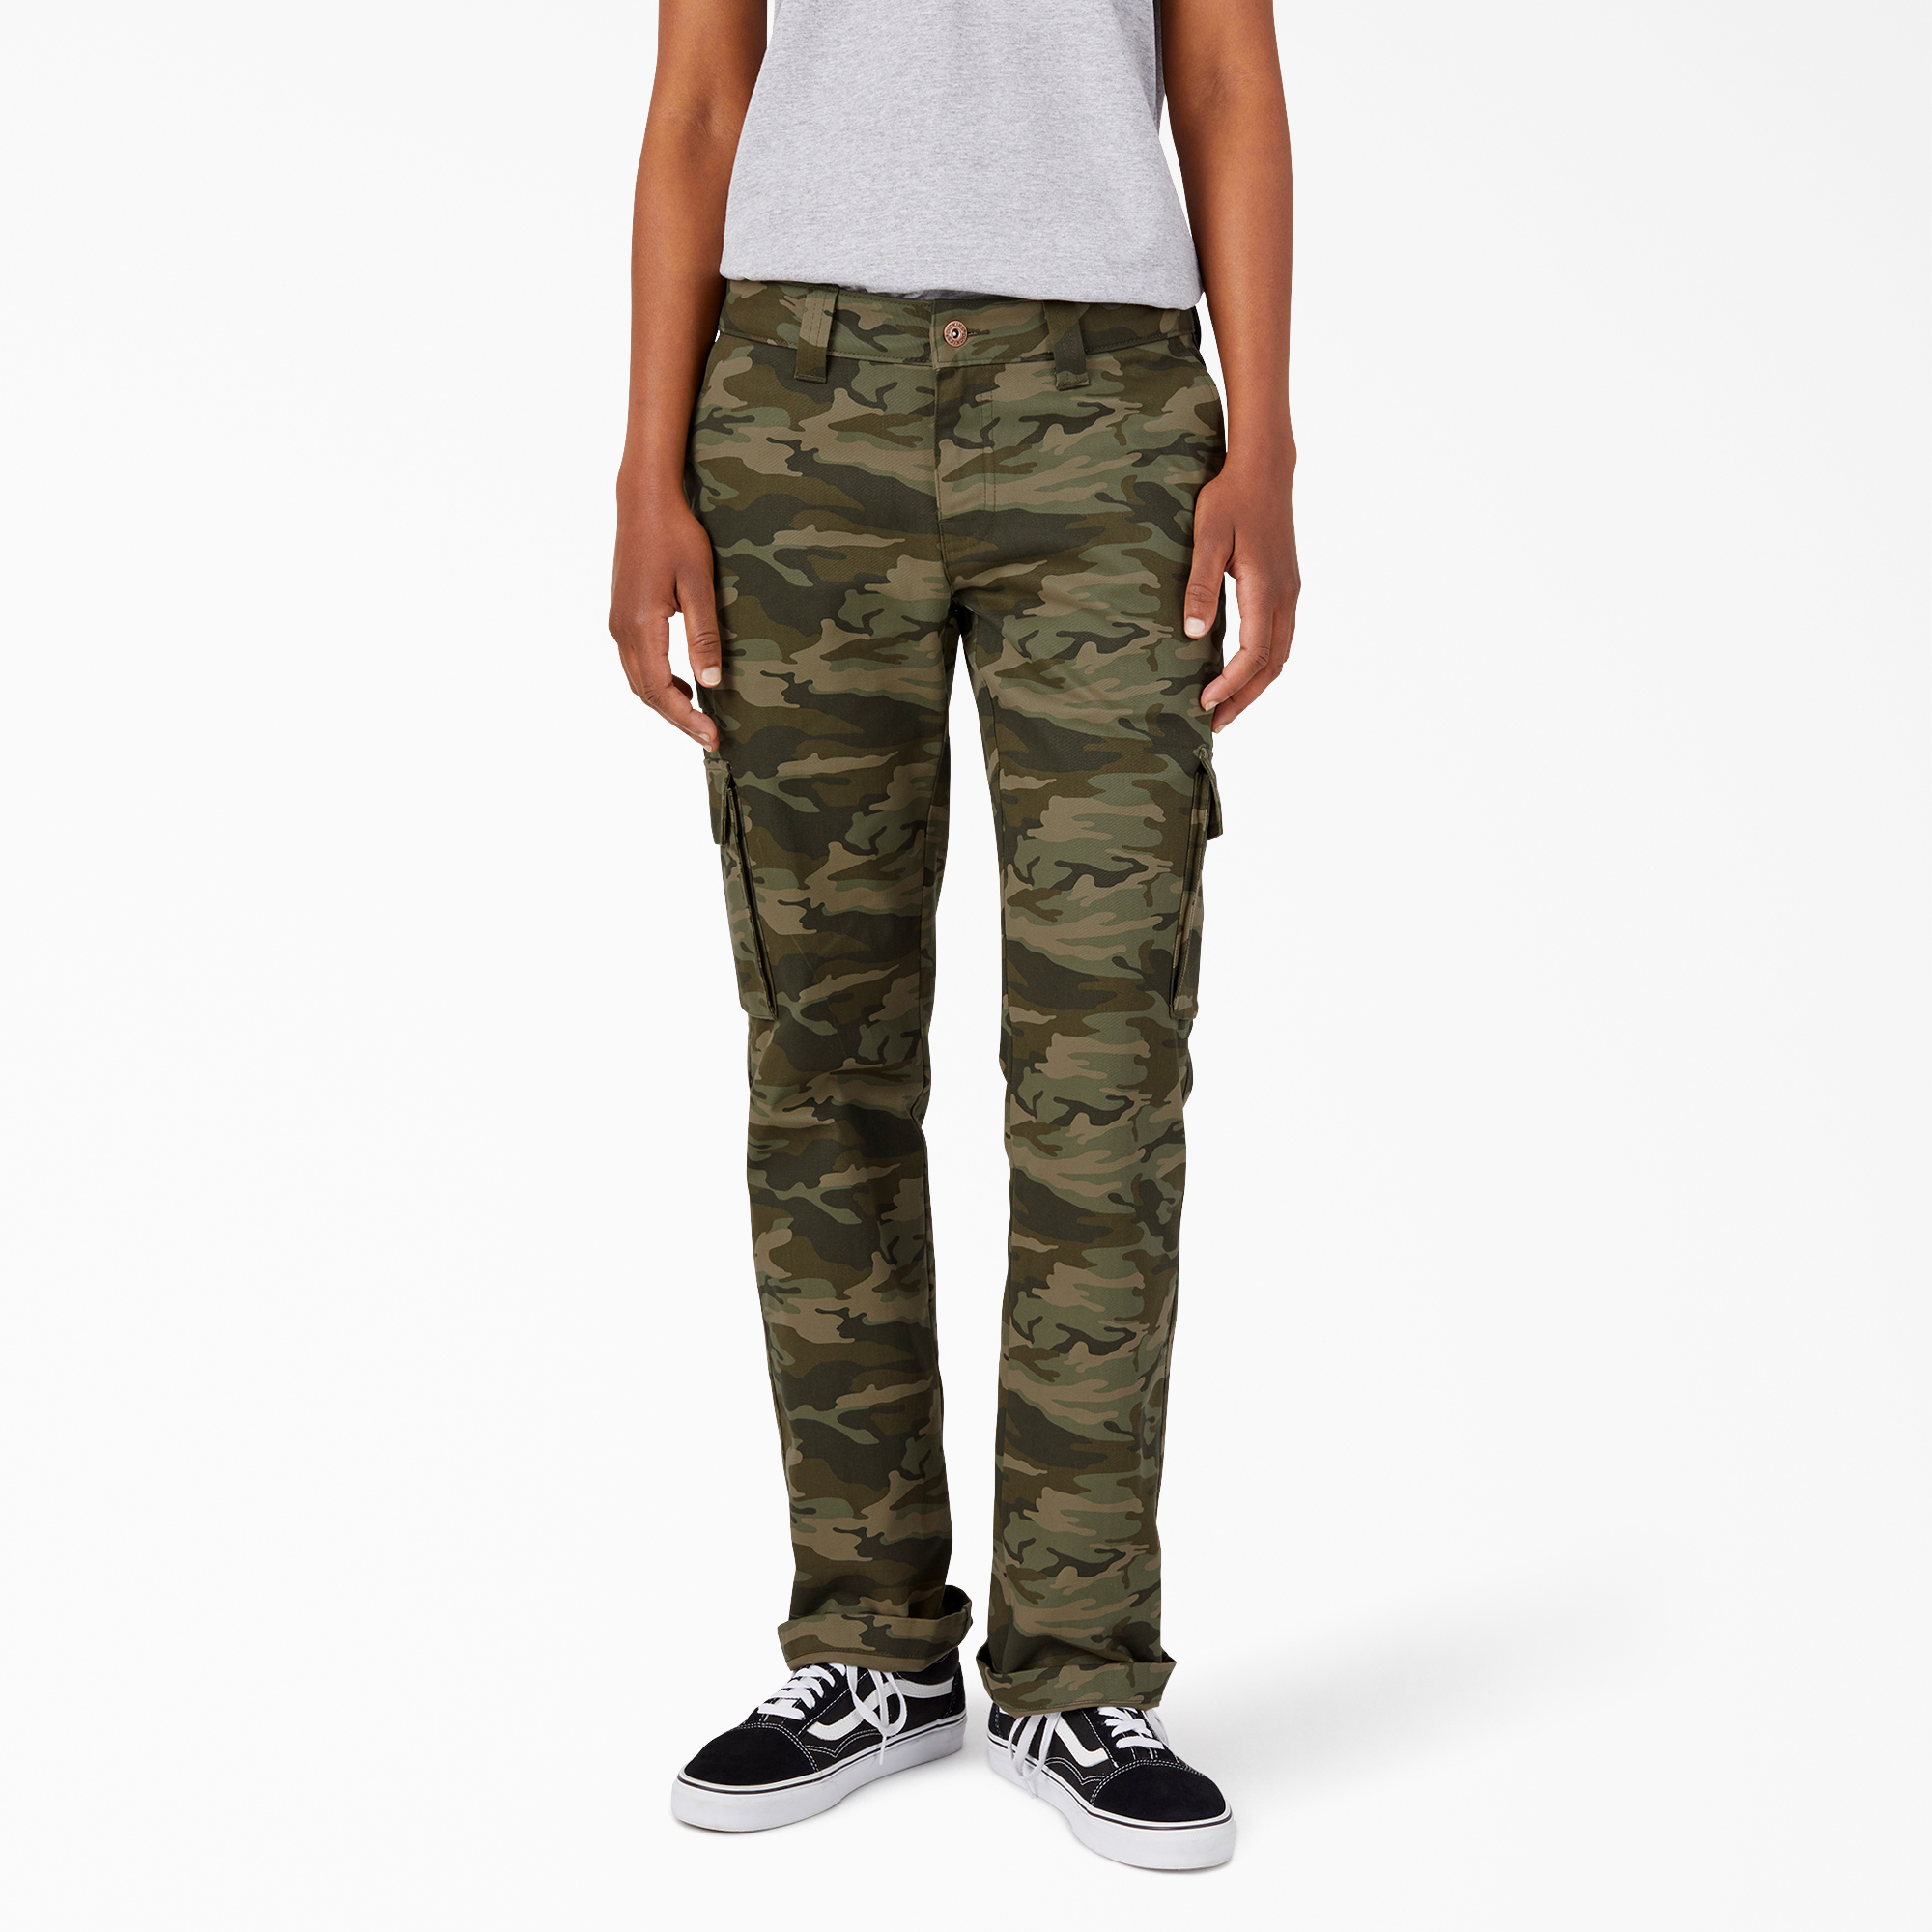 Women's Stretch Relaxed Cargo Pants - Light Sage Camo (LSC)